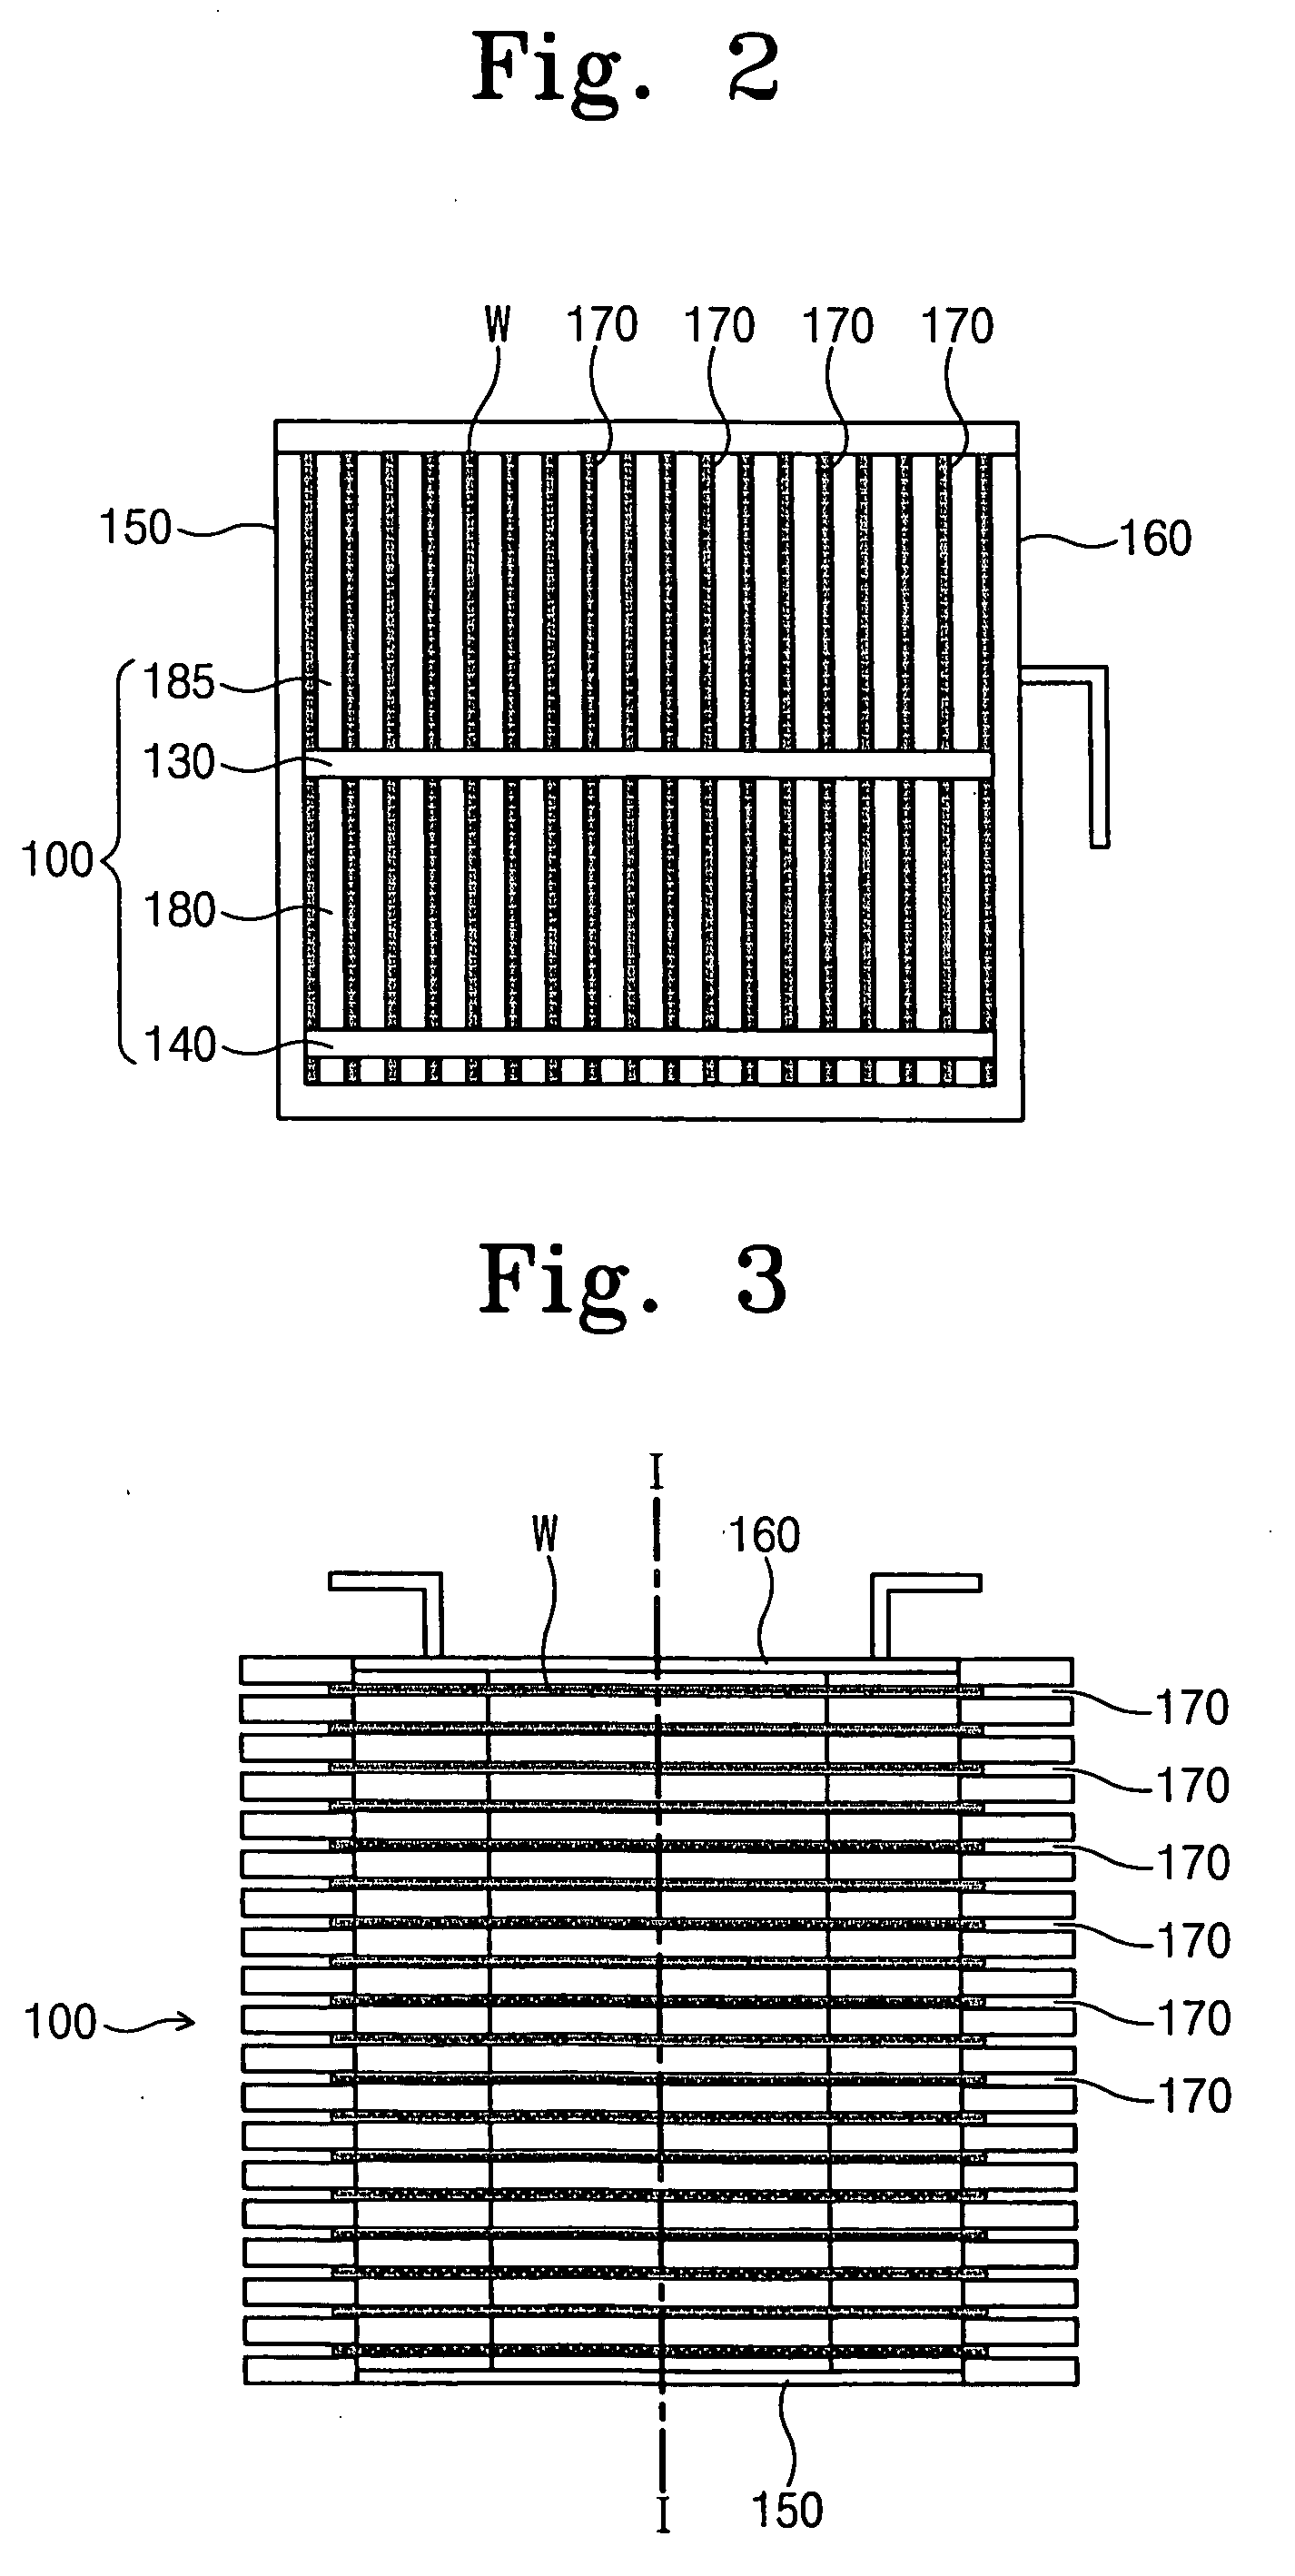 Wafer carrier for minimizing contacting area with wafers